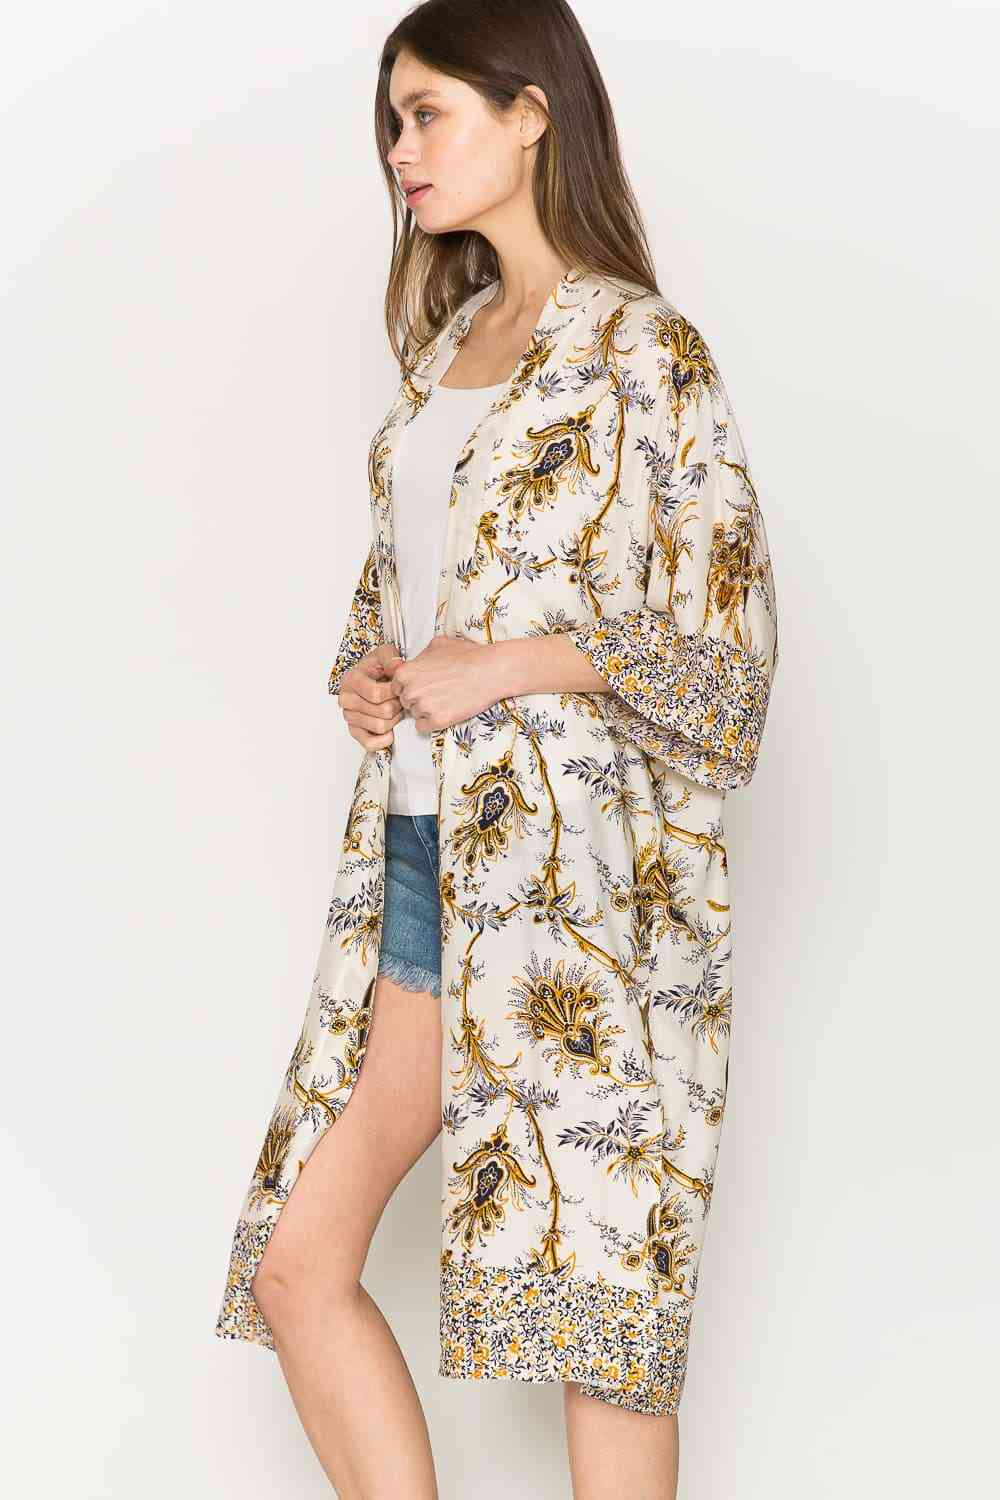 Floral Open Front Slit Duster Cardigan - Floral / One Size - Women’s Clothing & Accessories - Shirts & Tops - 4 - 2024